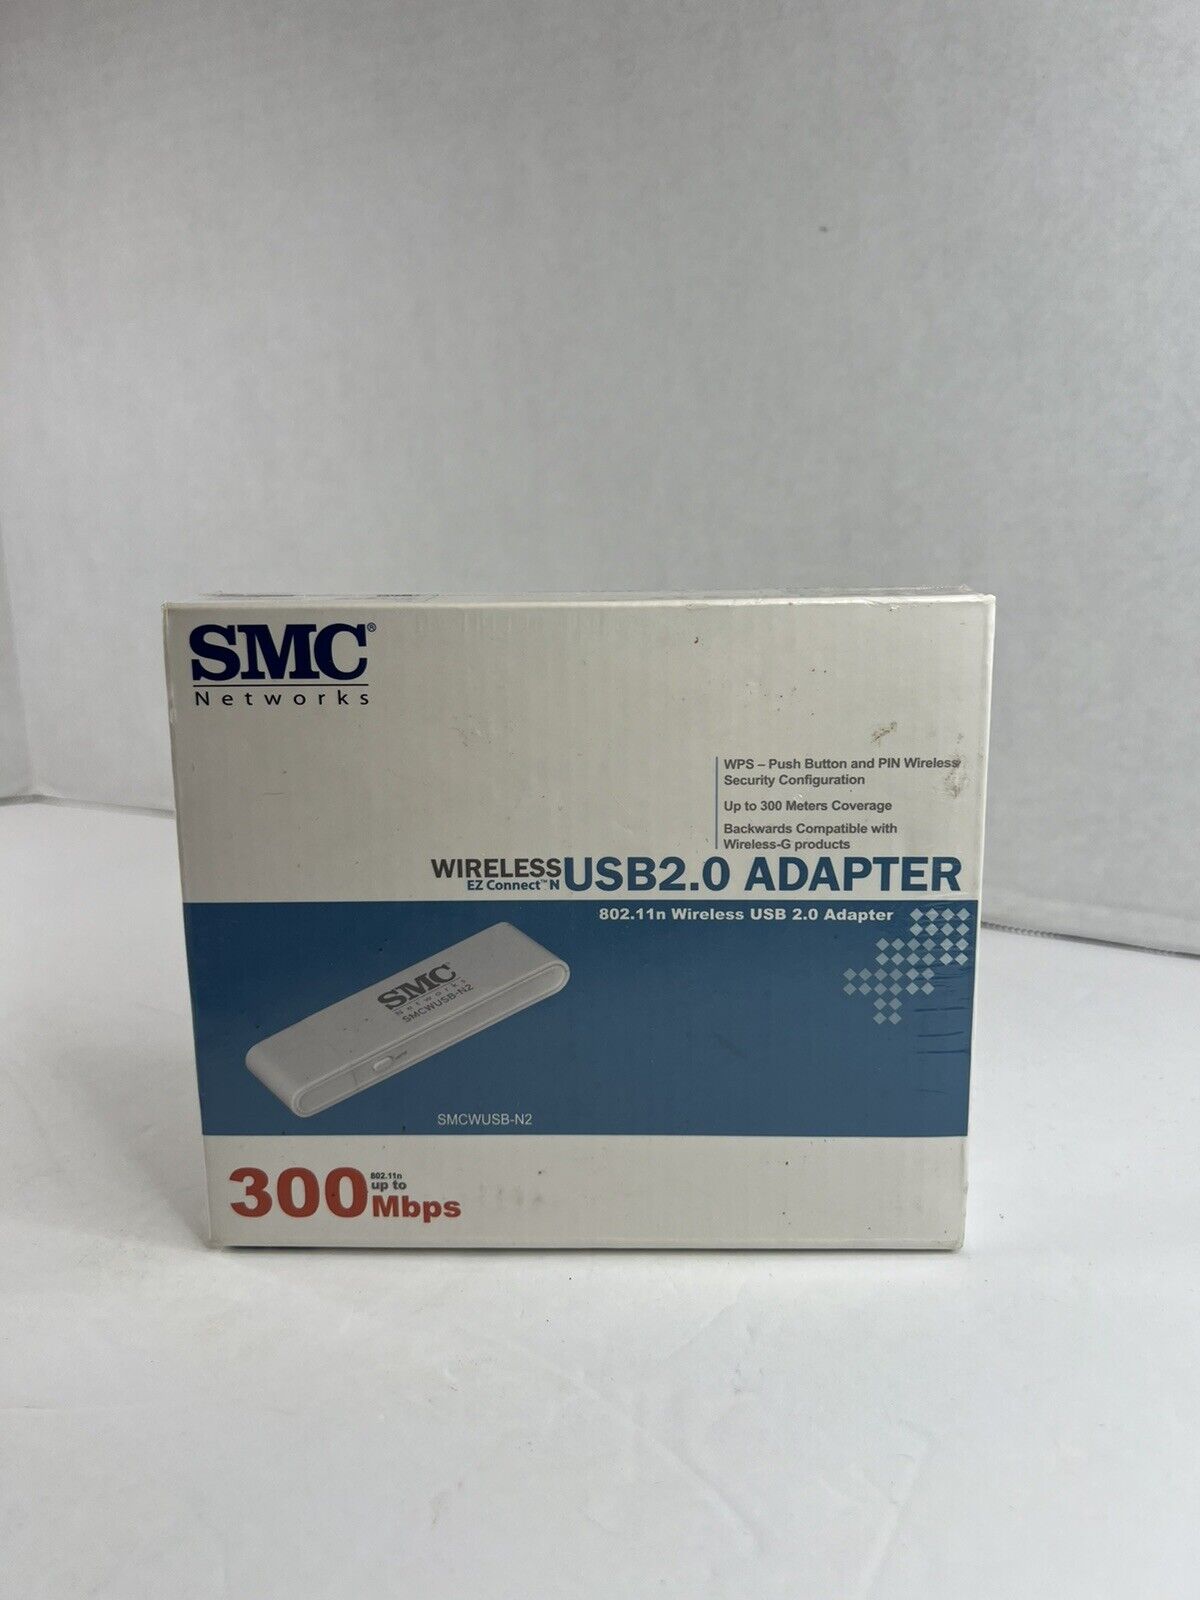 SMC Networks Wireless USB2.0 ADapter EZ Connect N 802.11n 300Mbps